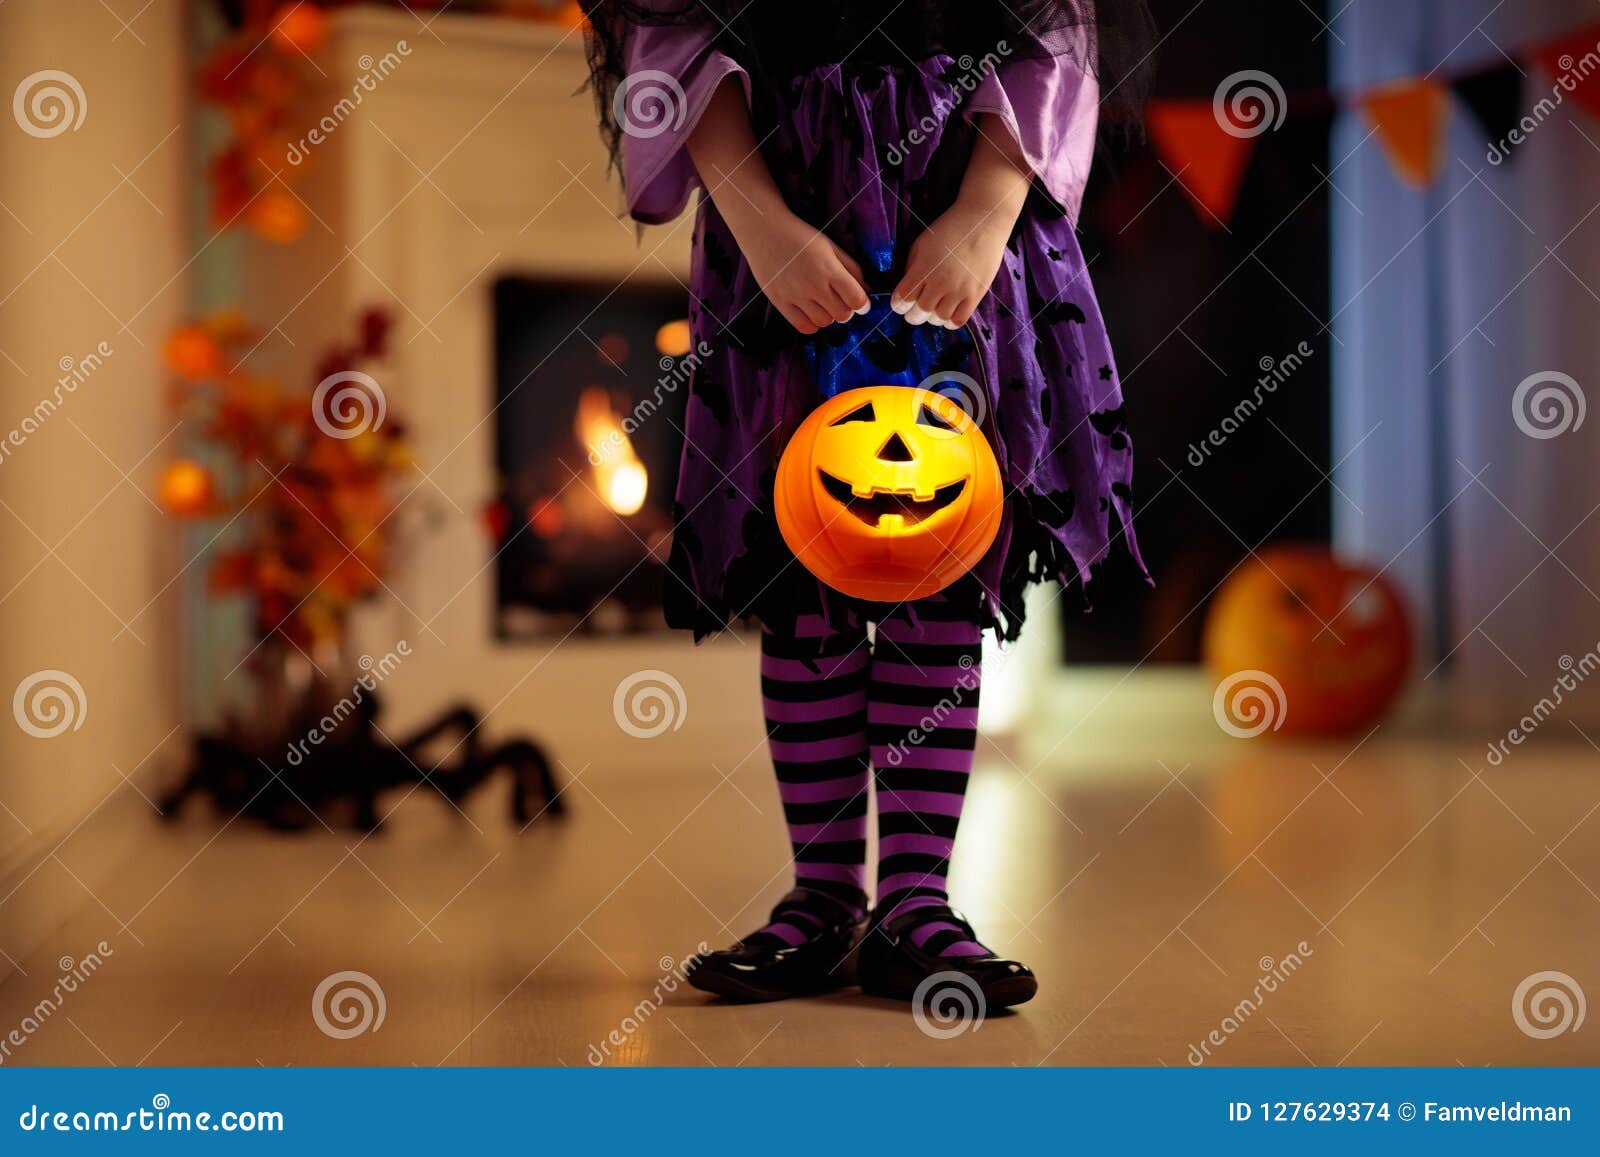 kids in witch costume on halloween trick or treat